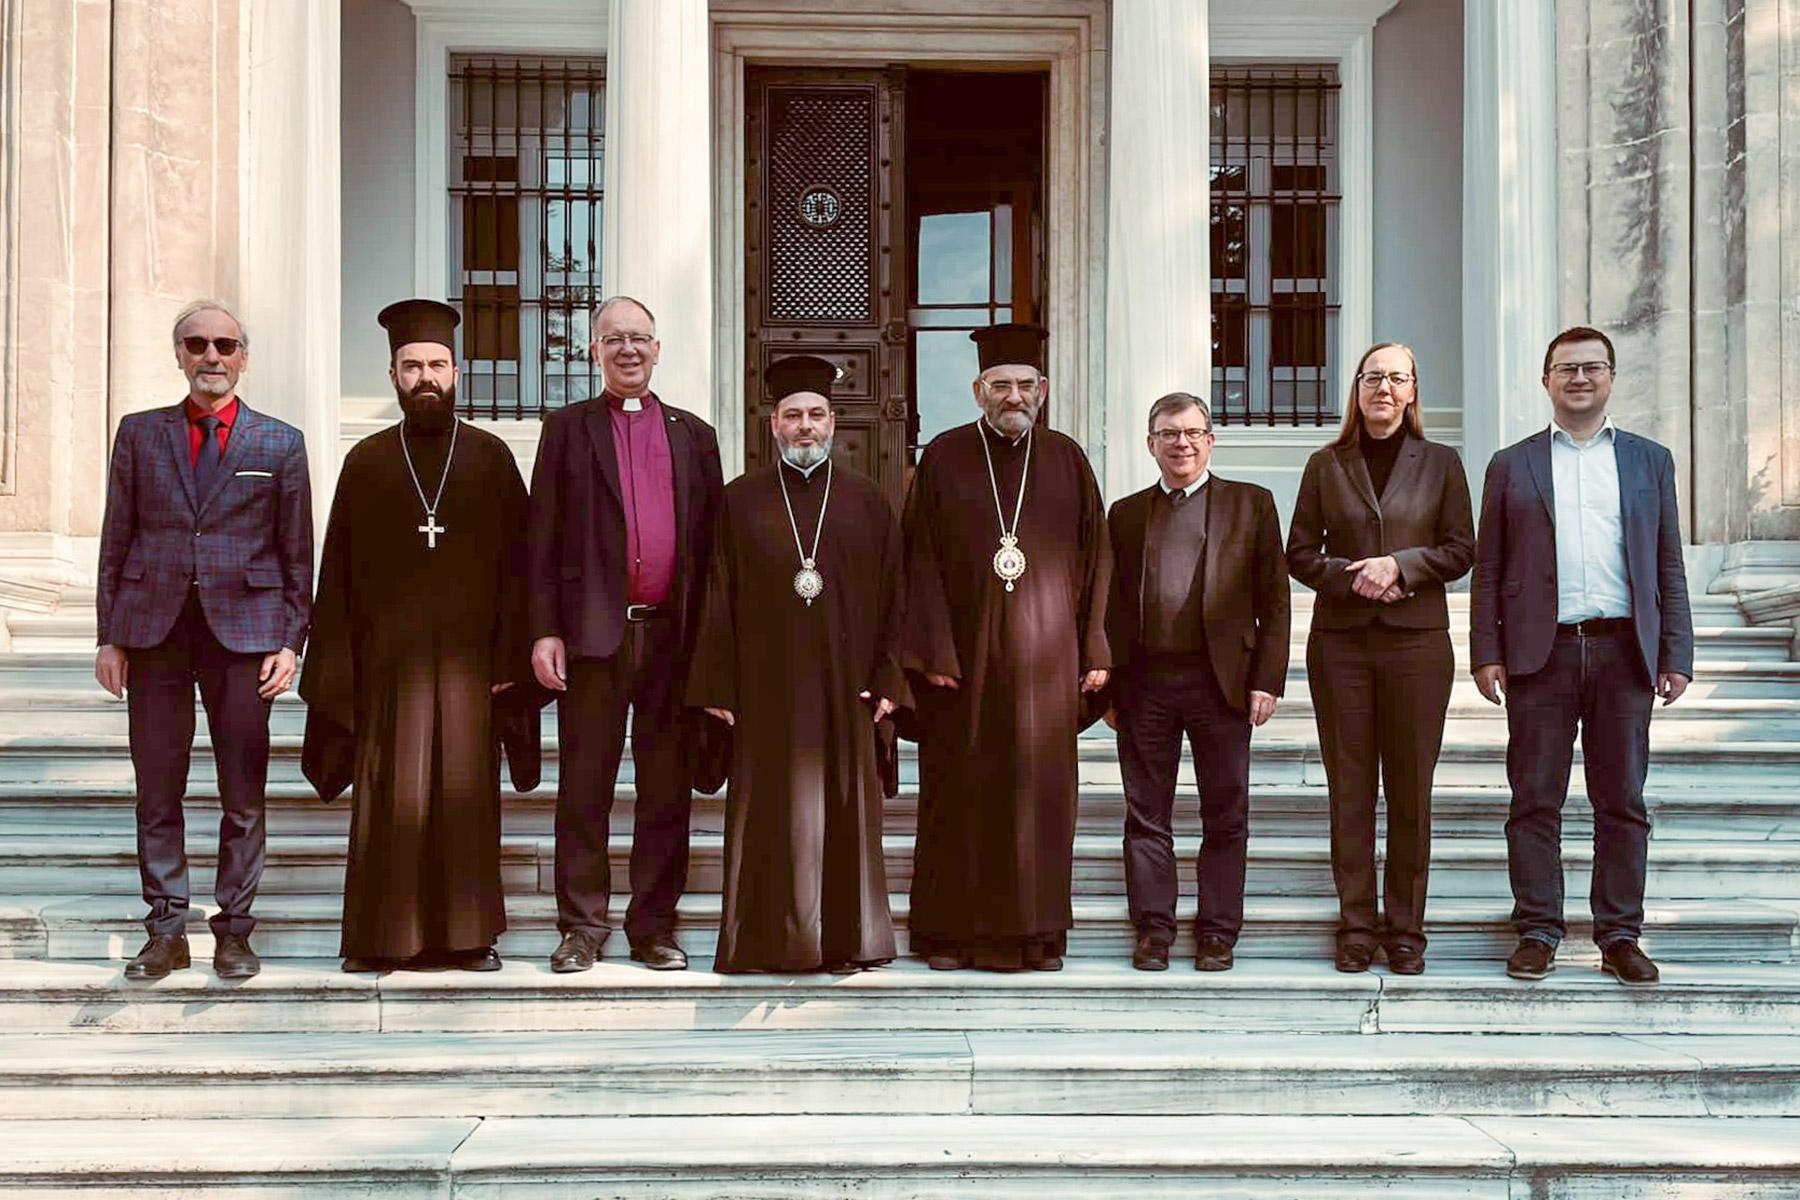 Participants at the Preparatory Committee meeting for the 18th plenary session of the Joint International Commission on the Theological Dialogue between the Lutheran World Federation and the Orthodox Church, held in Halki, Turkey. Photo: Stavropegial monastery